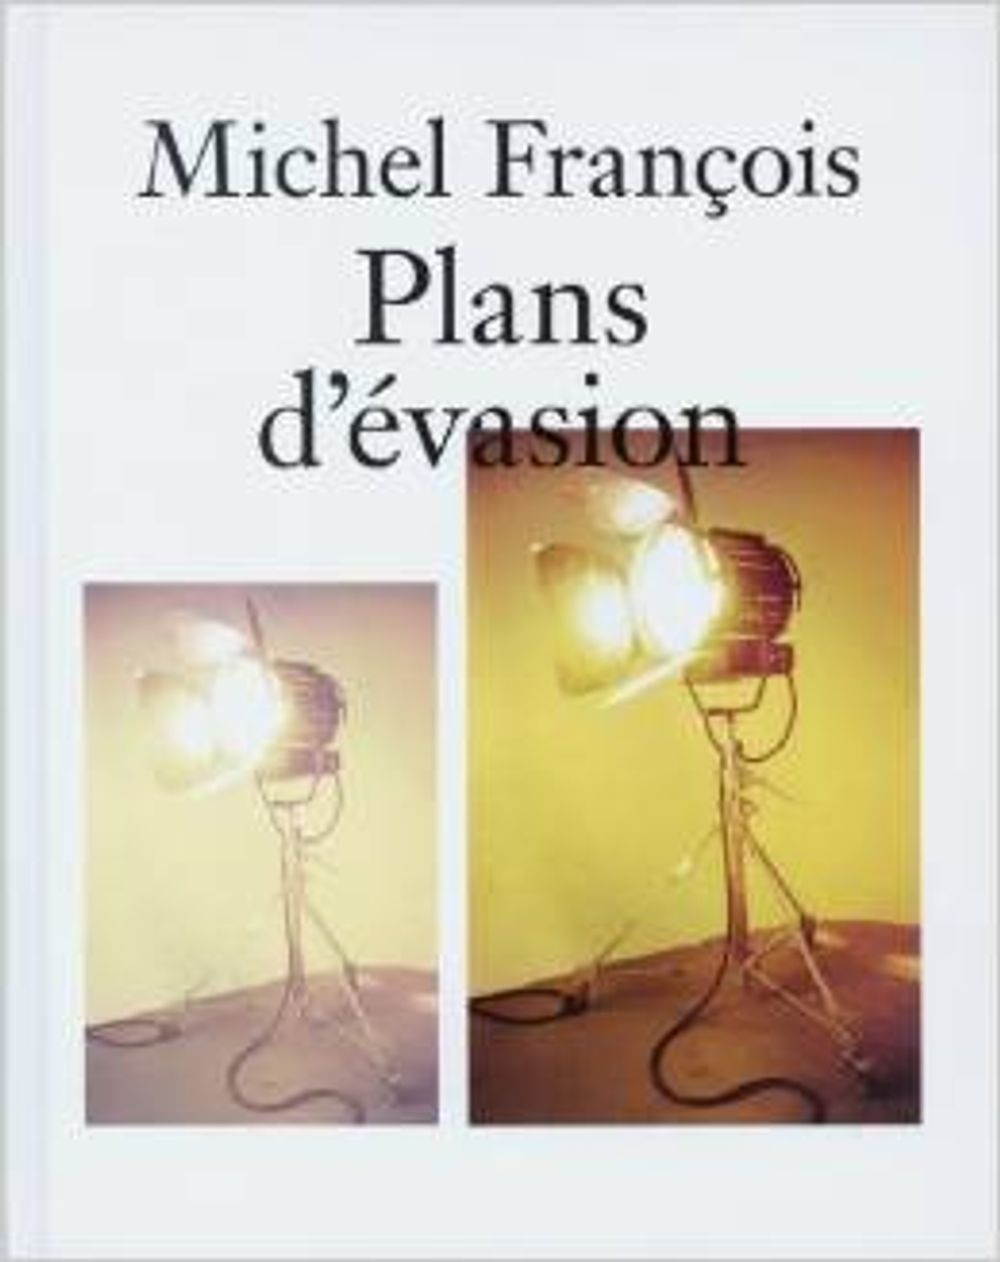 Book cover on plain gray background with title of Plans d’Evasion